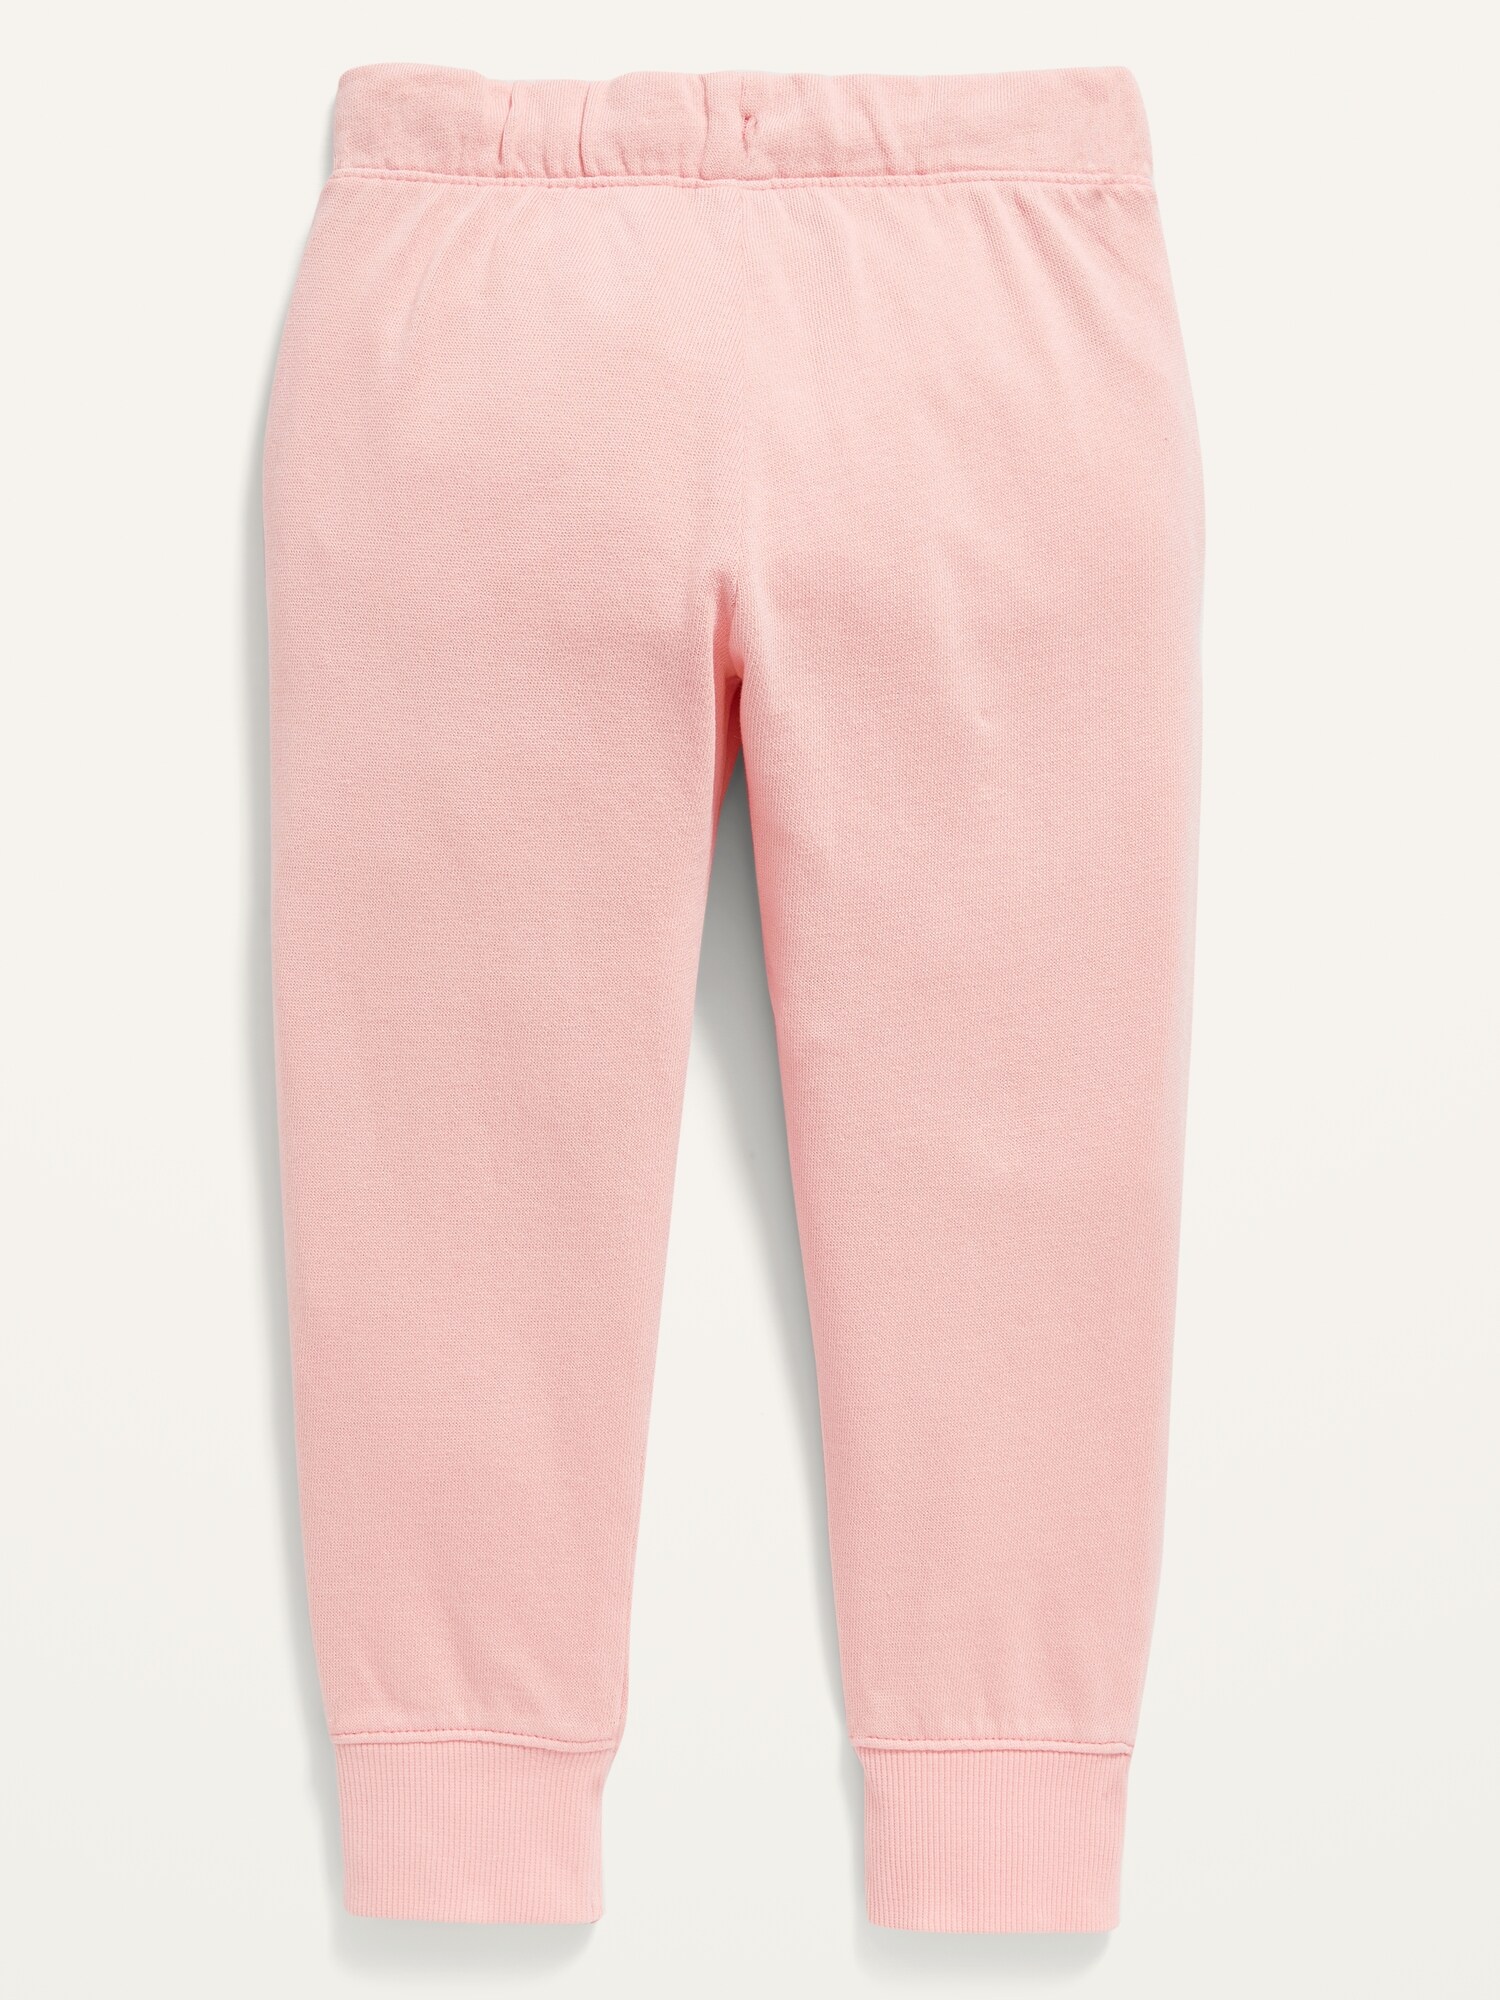 Unisex Garment-Dyed Jogger Sweatpants for Toddler | Old Navy